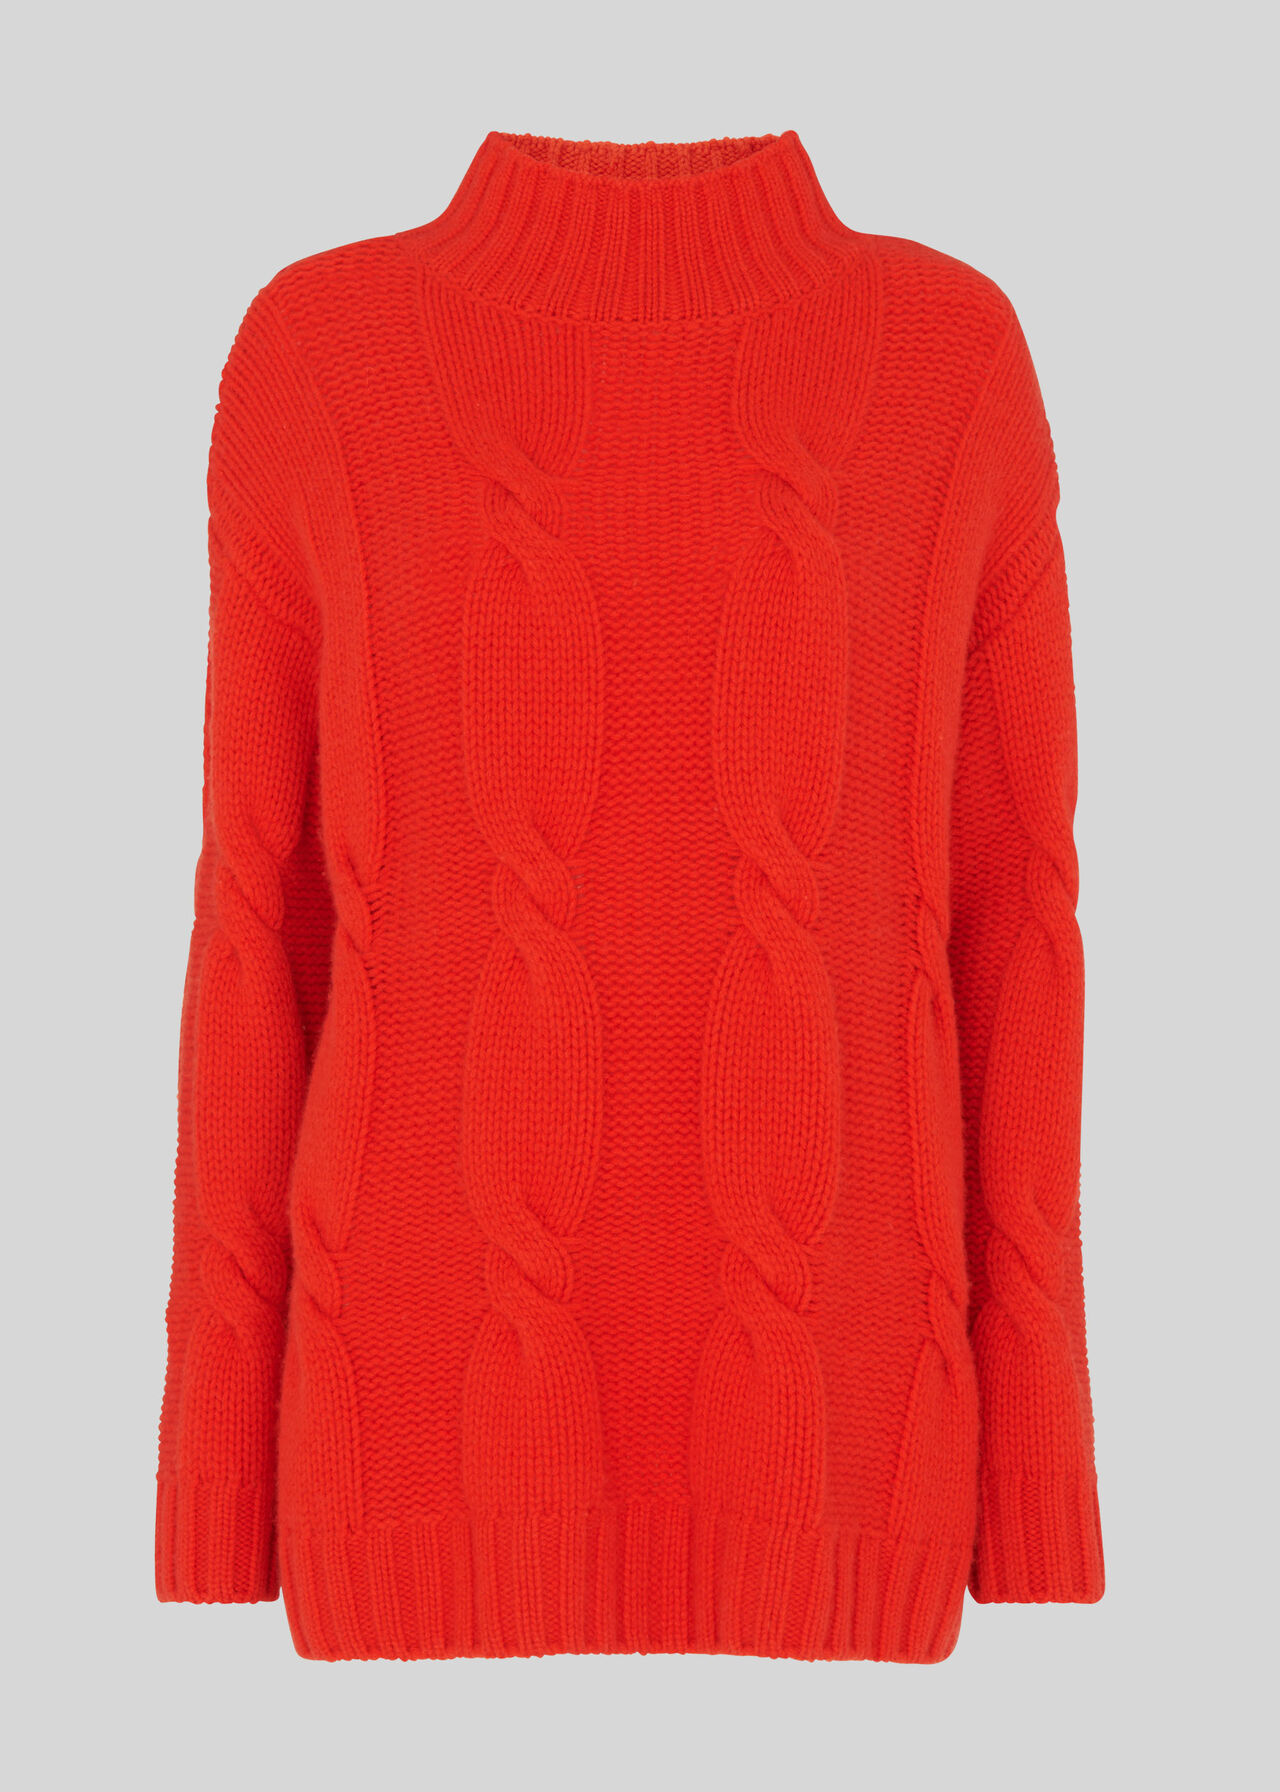 Cashmere Cable Knit Red